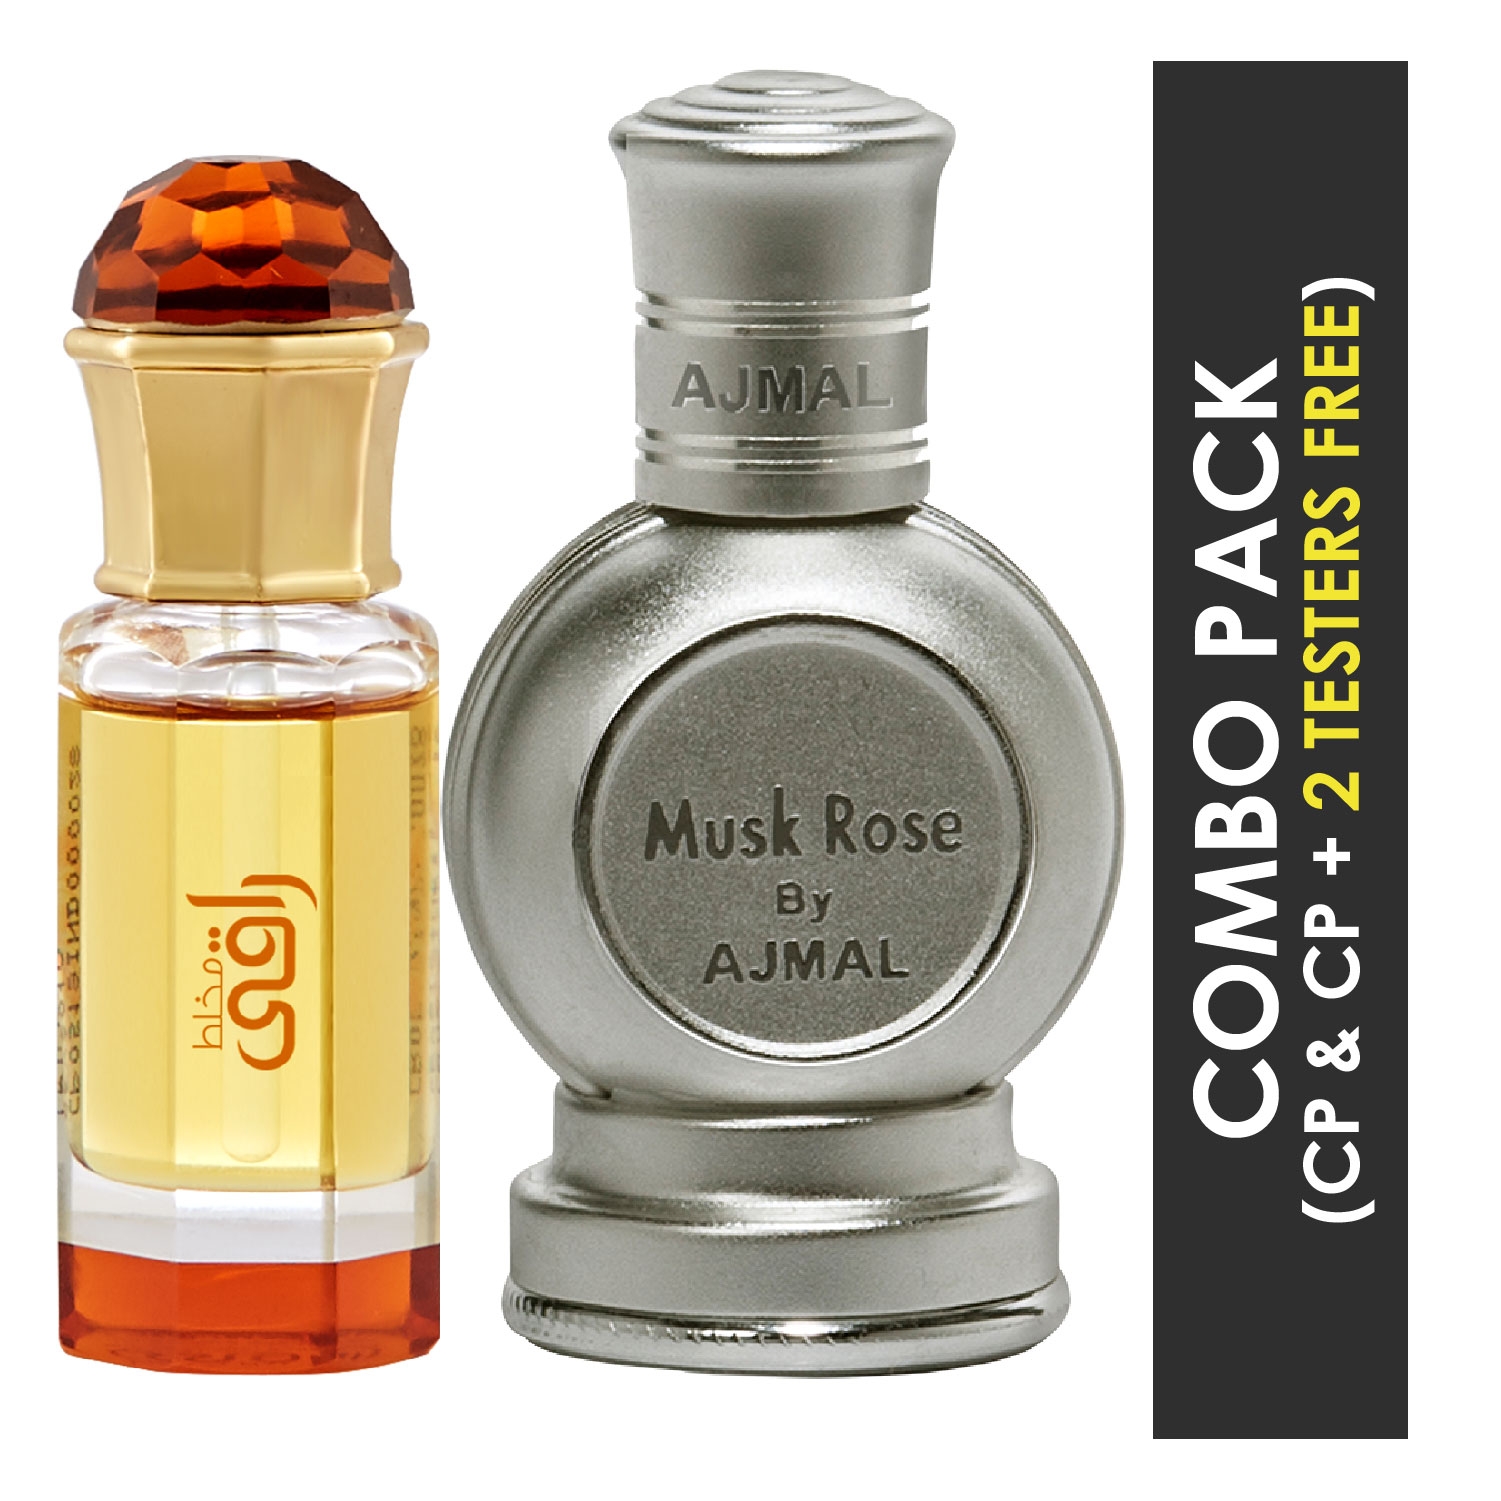 Ajmal | Ajmal Mukhallat Raaqi Concentrated Perfume Attar 10ml for Unisex and Musk Rose Concentrated Perfume Attar 12ml for Unisex + 2 Parfum Testers FREE